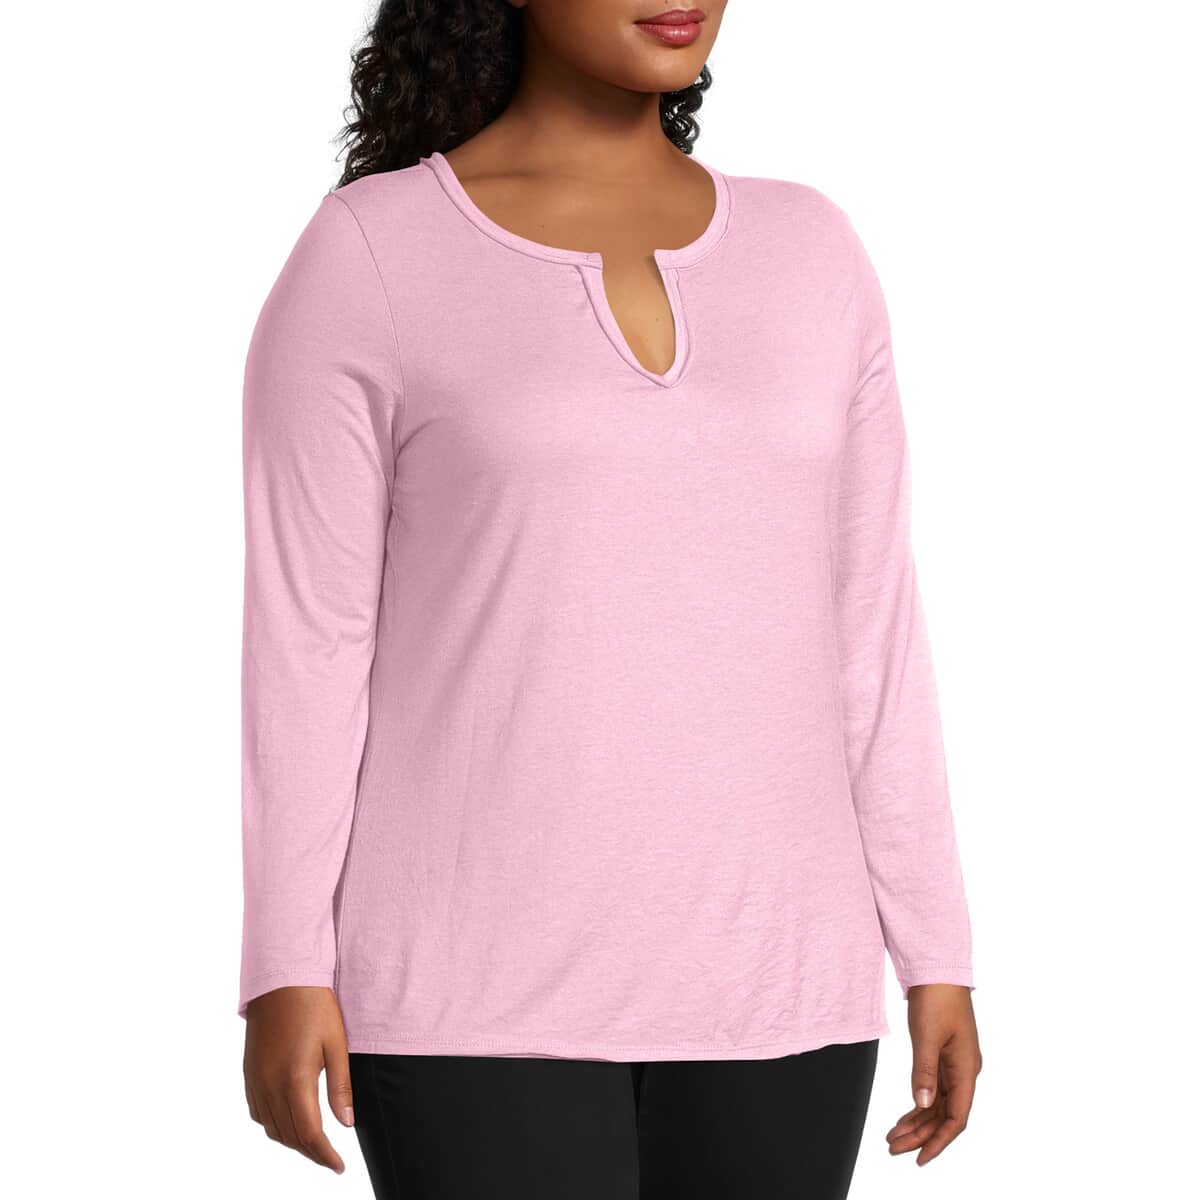 Closeout TLV 3 Pack - Hanes Just My Size Long Sleeve T-Shirts - Fuchsia, Teal, Light Pink (2X) image number 6